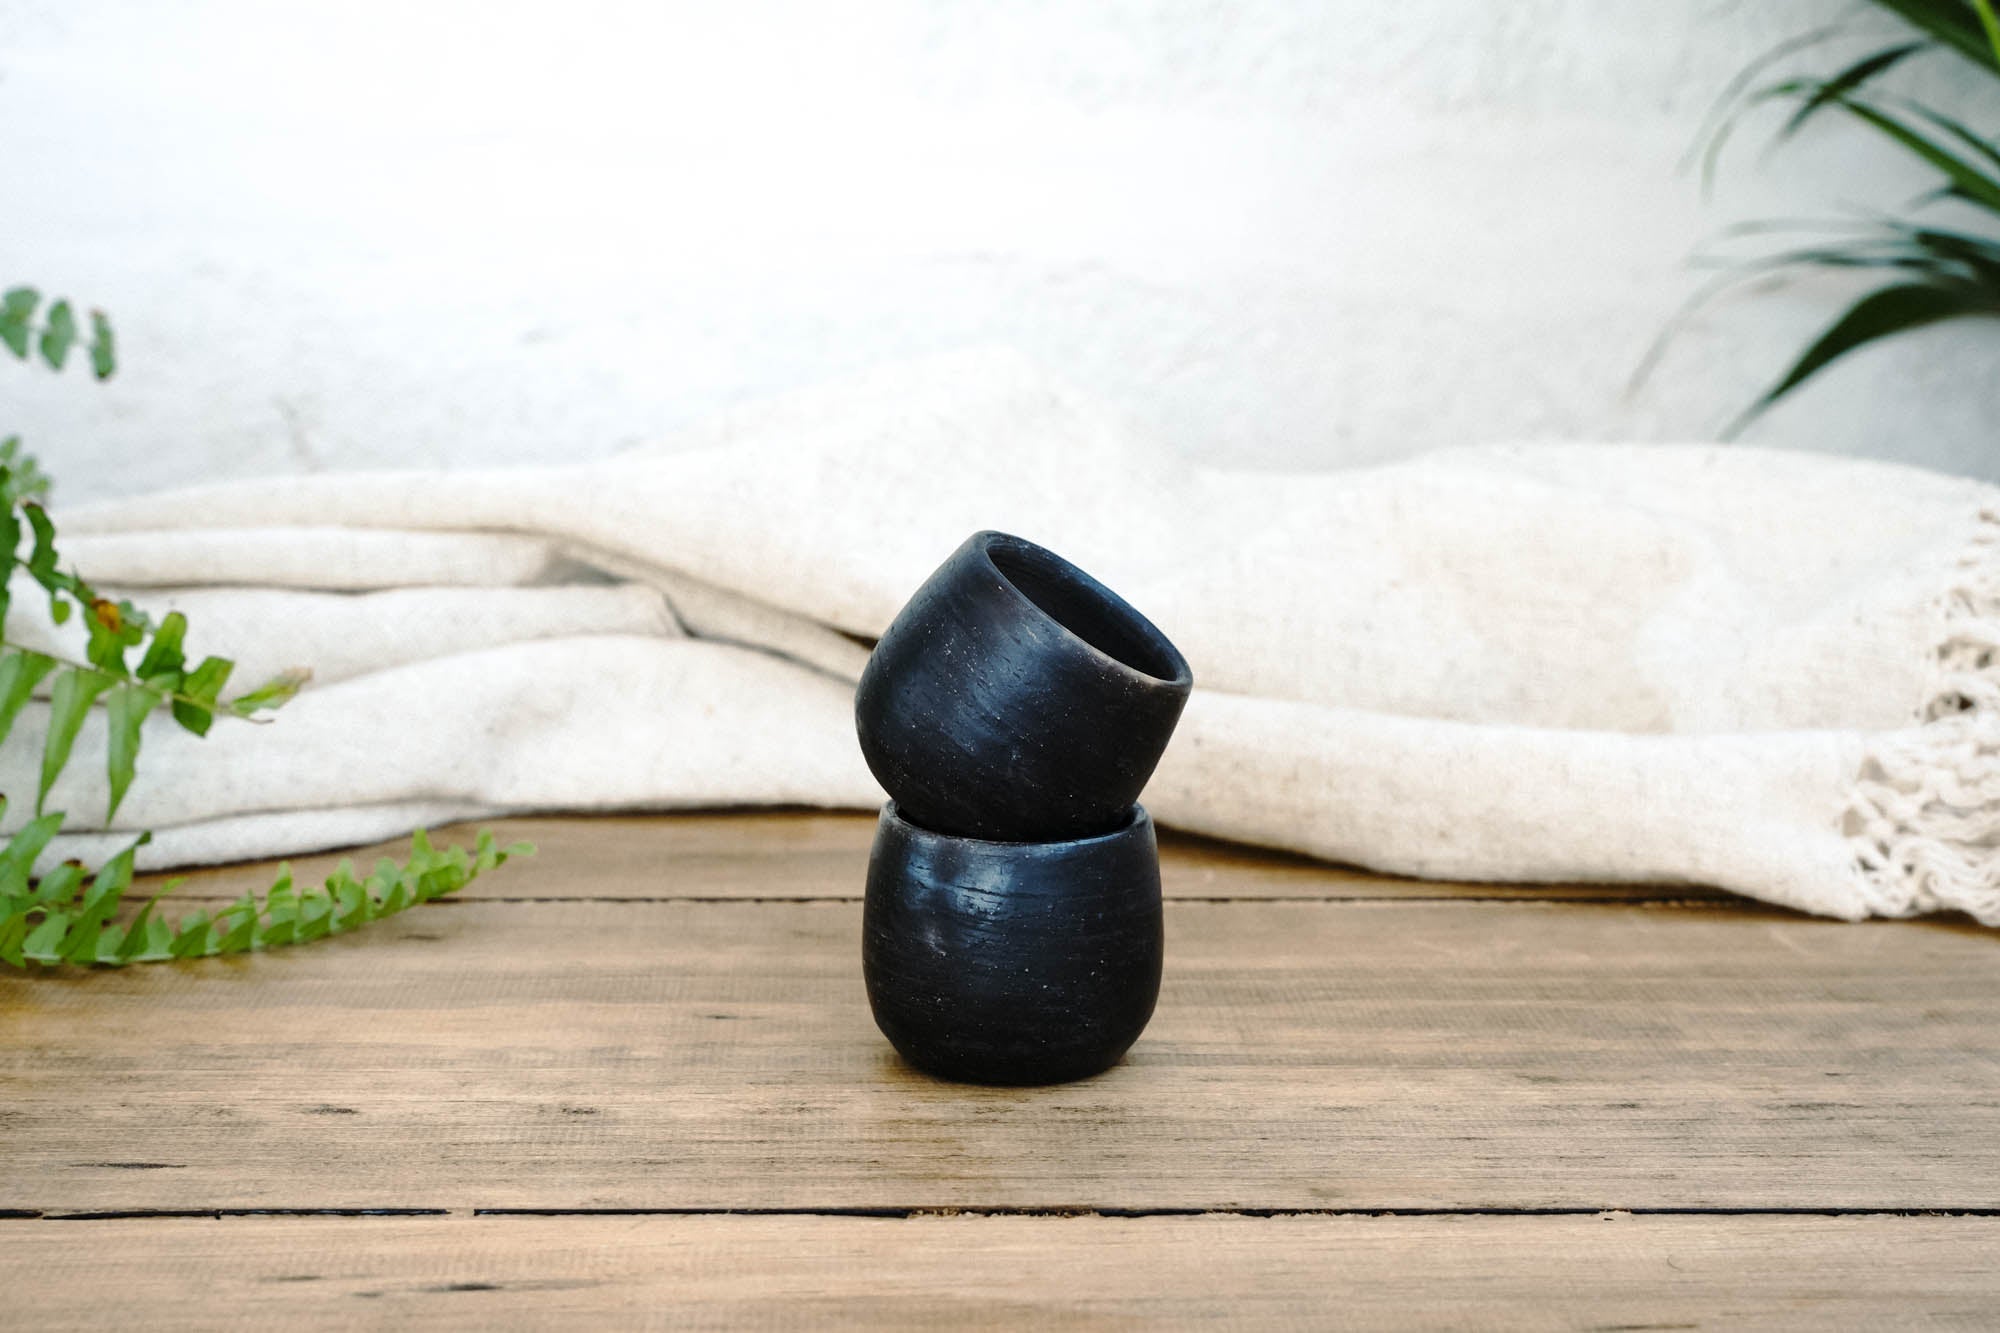 The Blackout Round Copita by Ana Beatrice Martínez - Wool+Clay